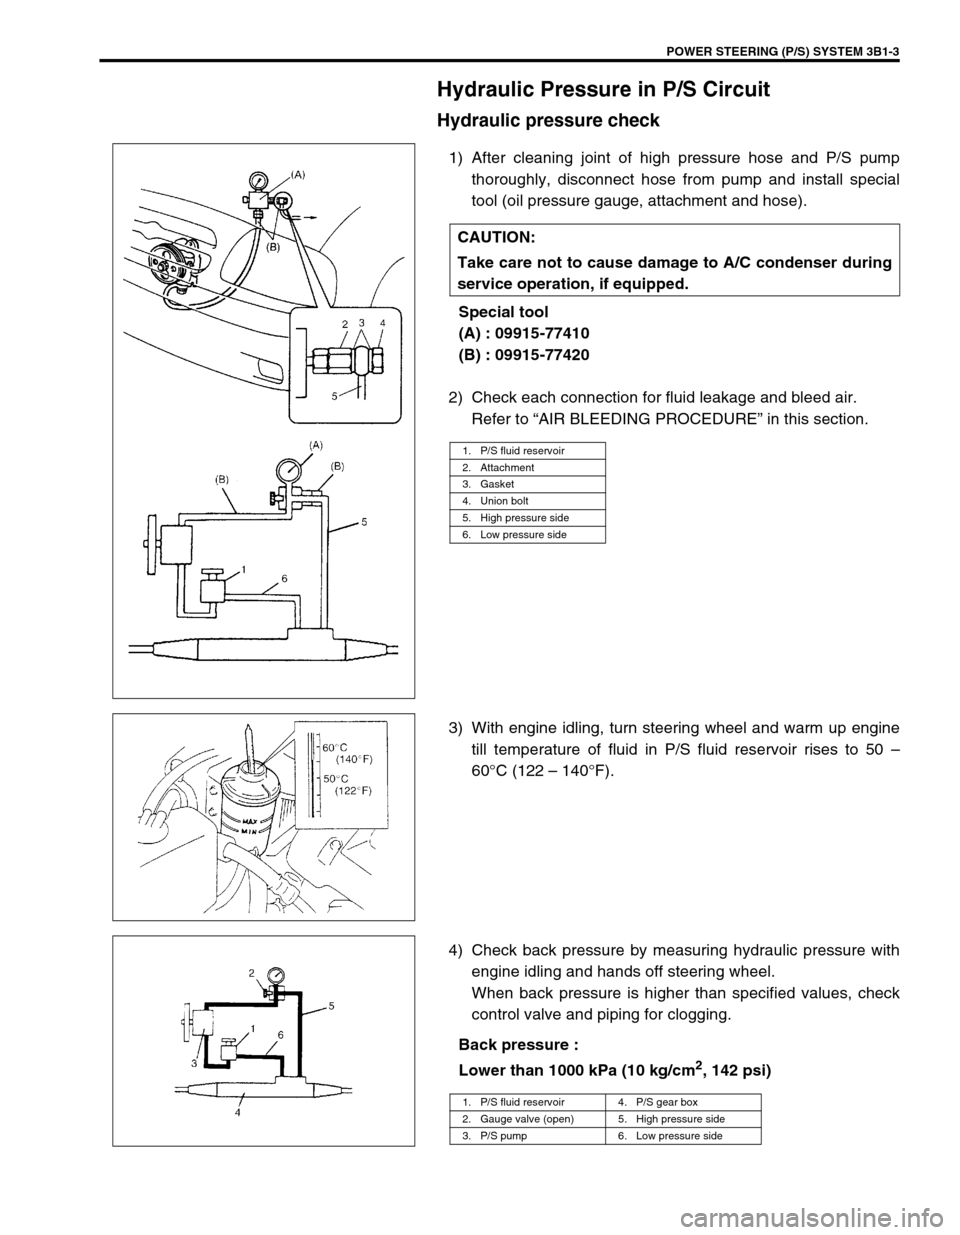 SUZUKI GRAND VITARA 1999 2.G User Guide POWER STEERING (P/S) SYSTEM 3B1-3
Hydraulic Pressure in P/S Circuit
Hydraulic pressure check
1) After cleaning joint of high pressure hose and P/S pump
thoroughly, disconnect hose from pump and instal